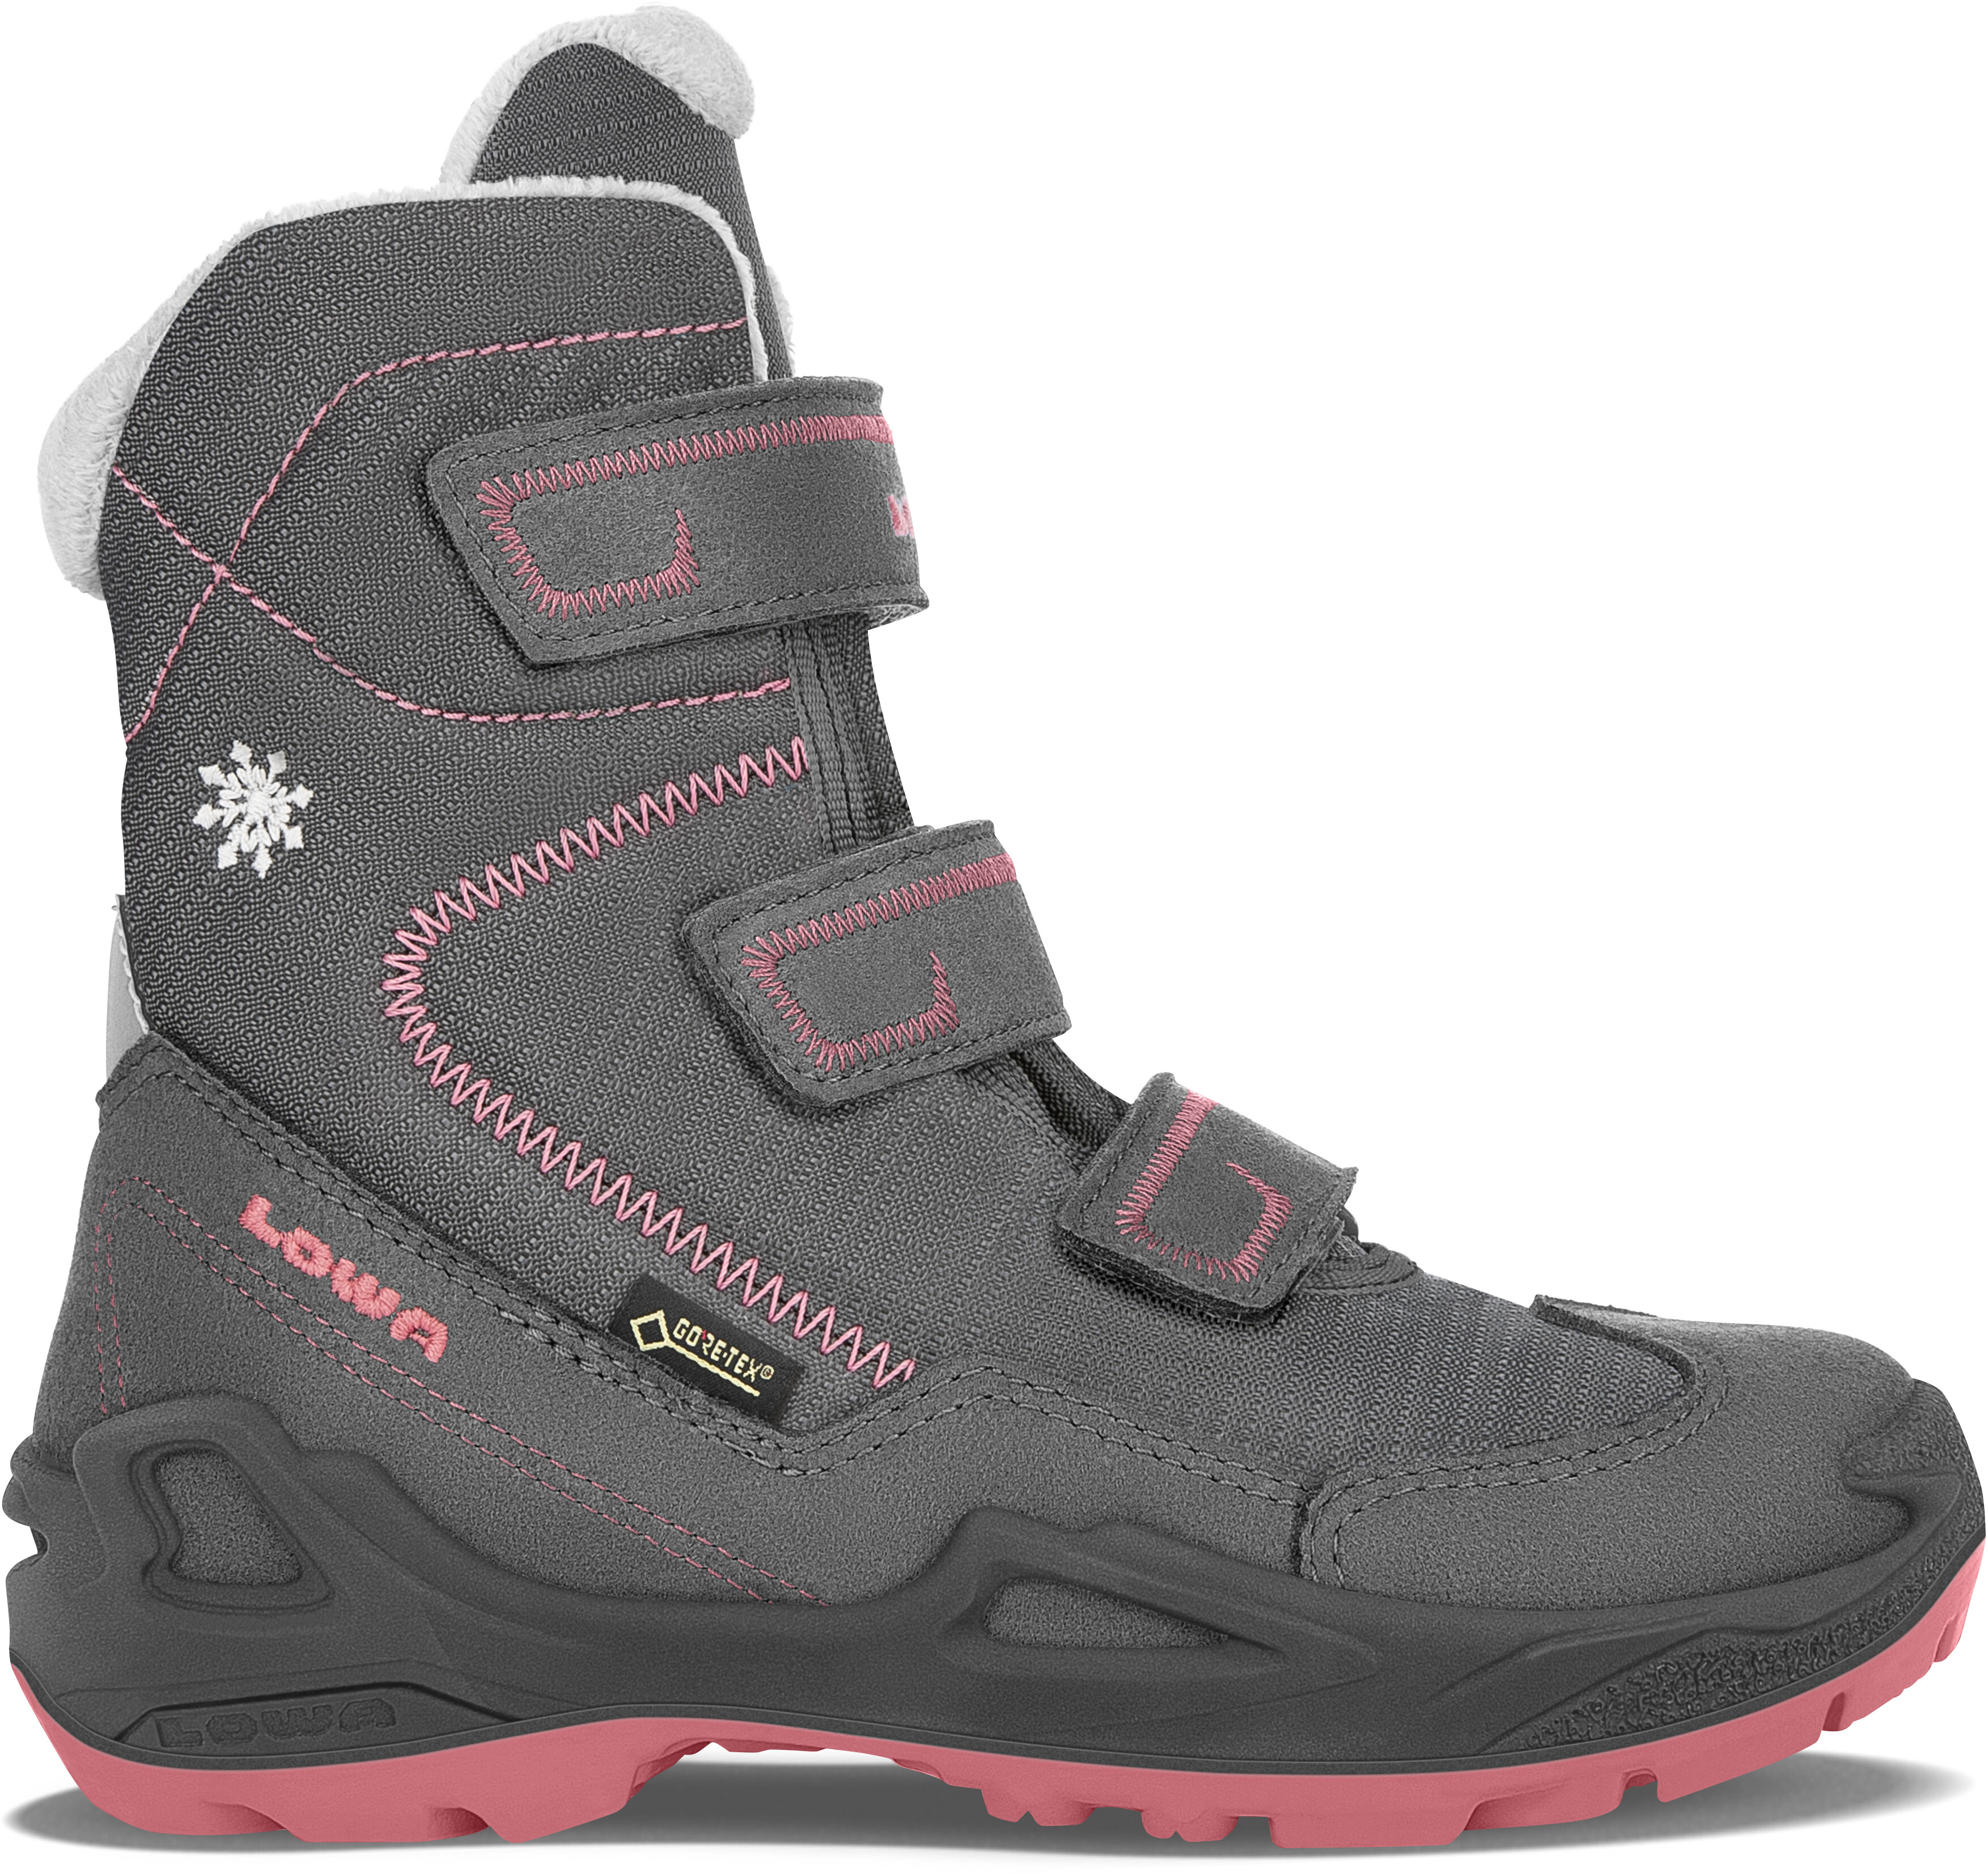 Lowa Milo GTX High-Cut Stiefel Kinder anthracite/coral | campz.at